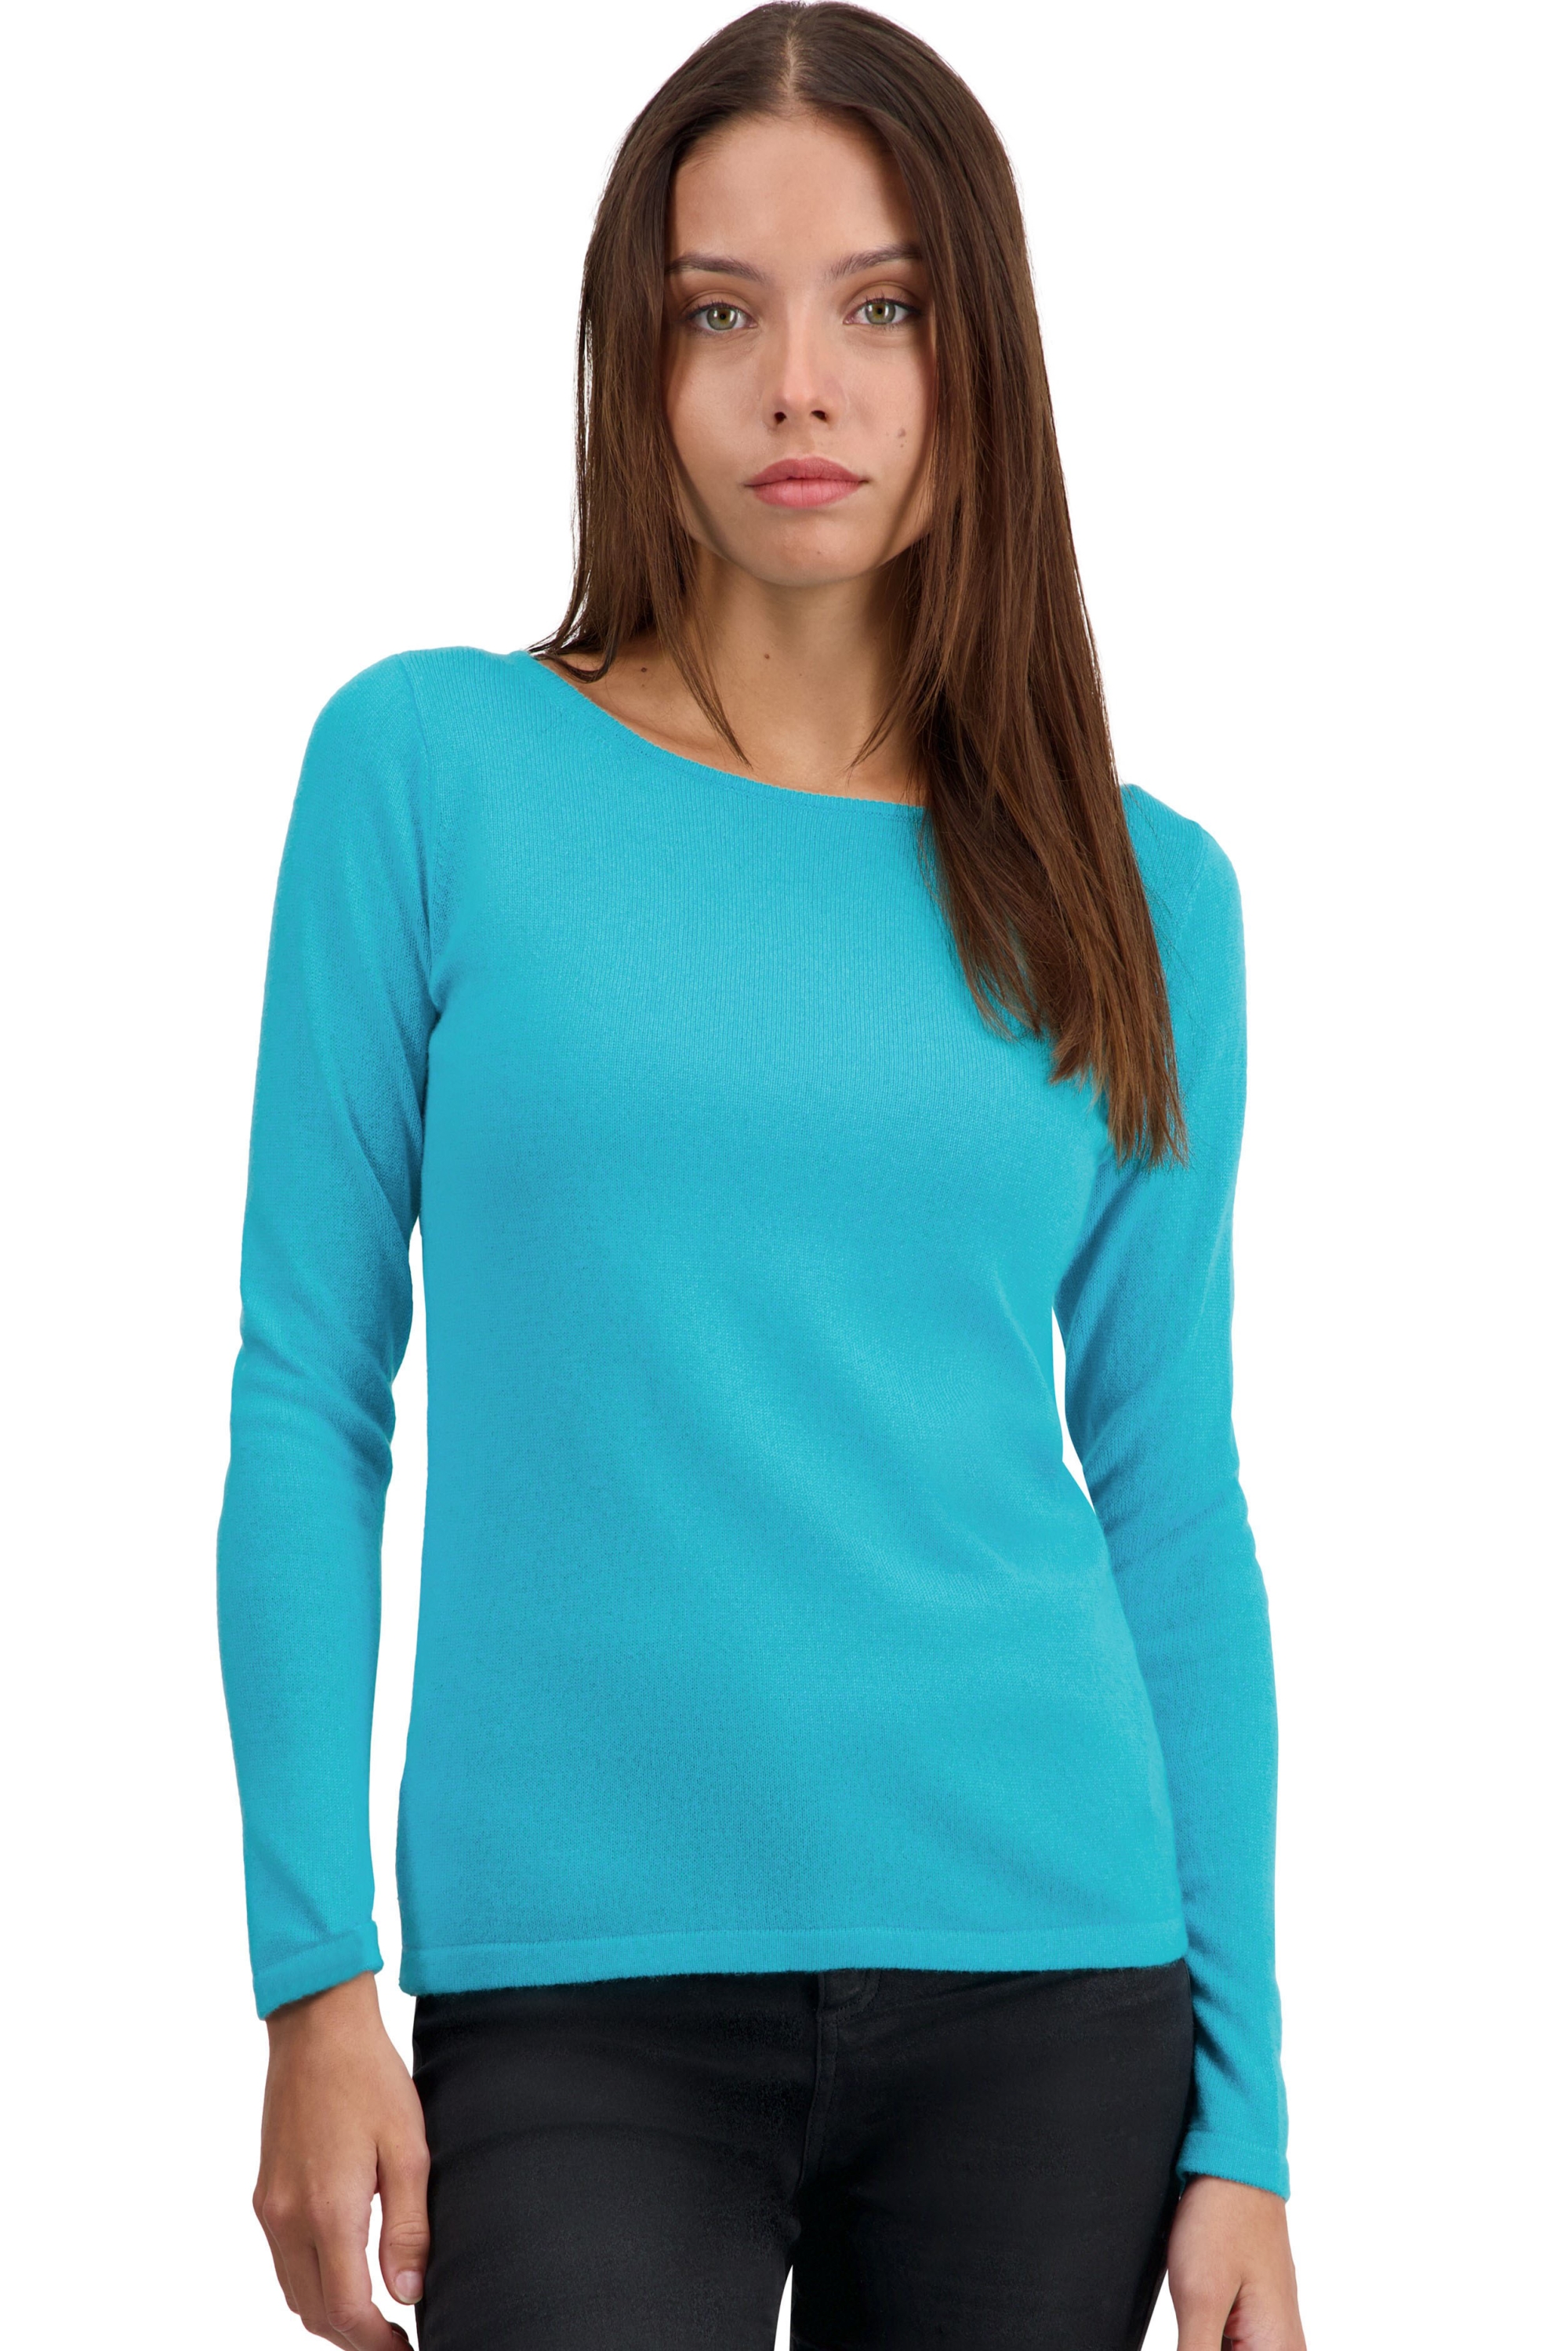 Cashmere ladies tennessy first kingfisher s